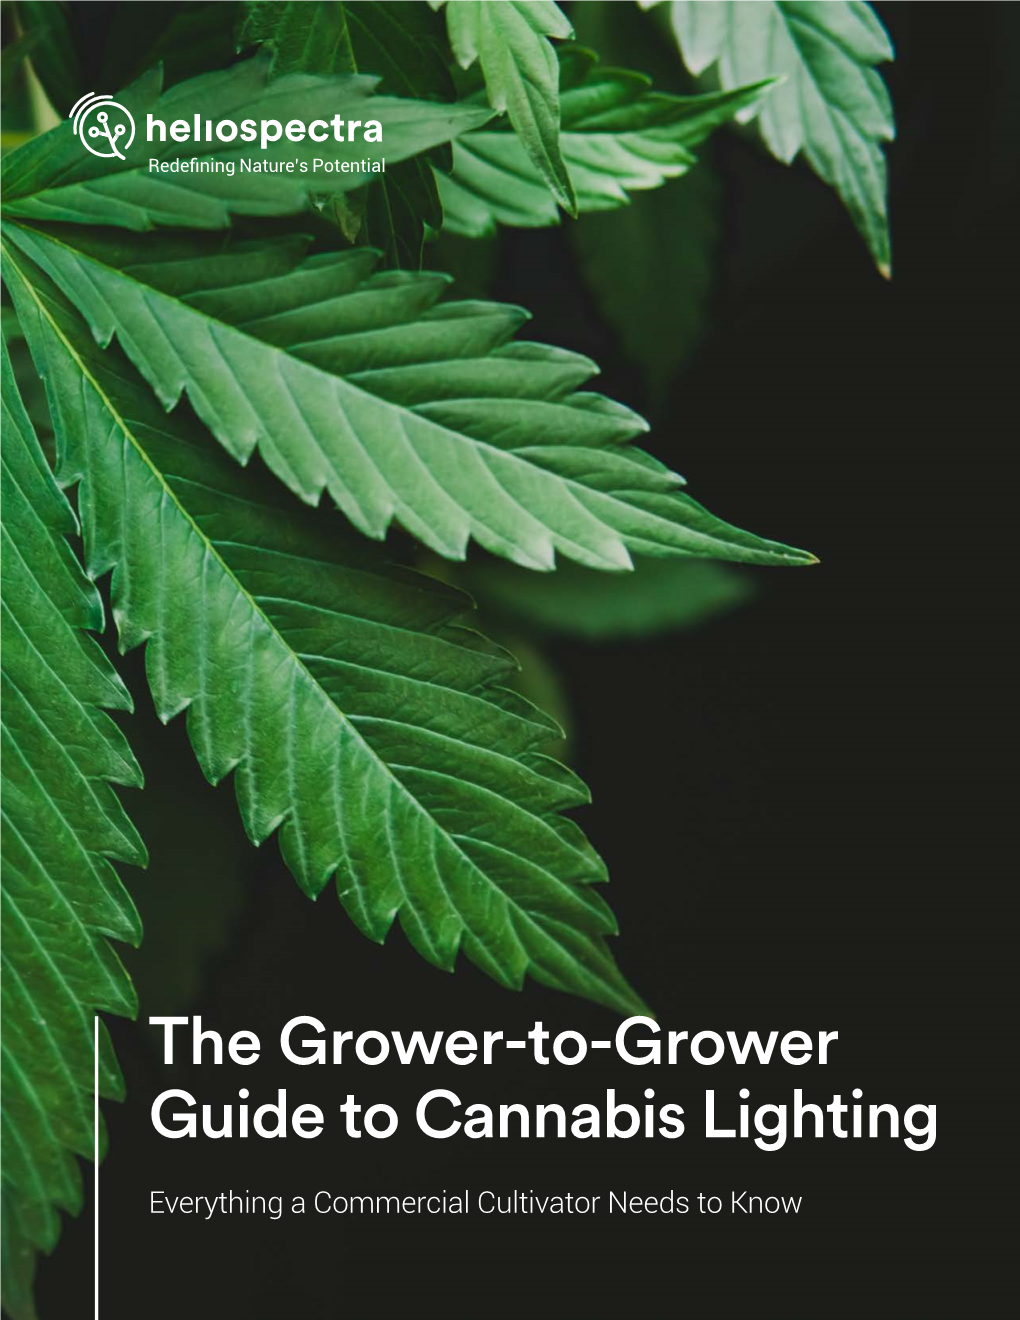 The Grower-To-Grower Guide to Cannabis Lighting